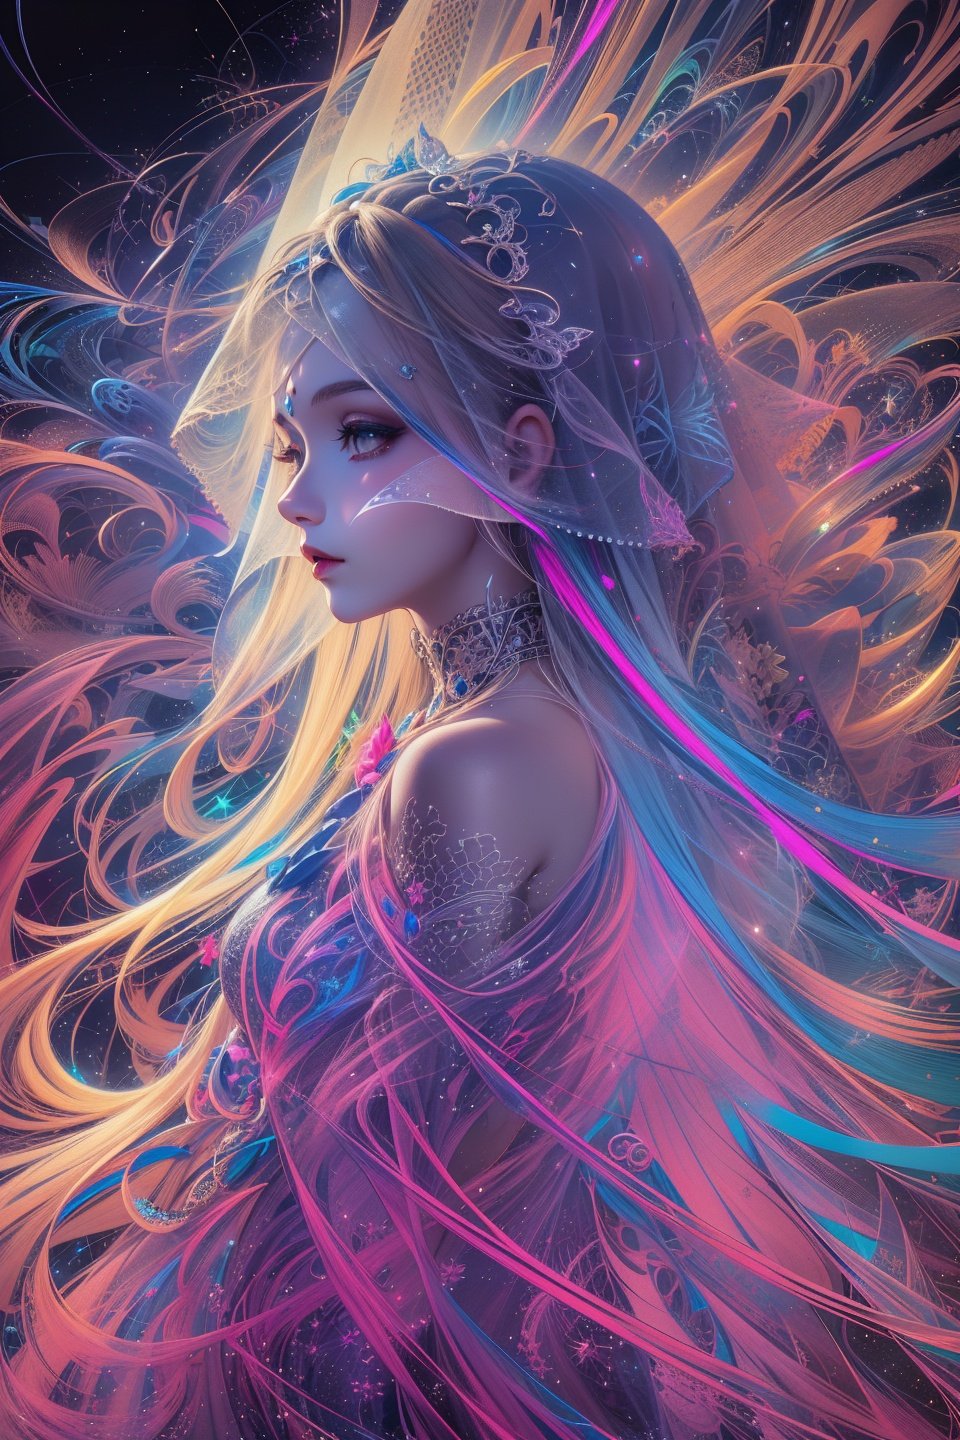 (masterpiece, top quality, best quality, official art, beautiful and aesthetic:1.2), (1girl:1.3), extremely detailed,(fractal art:1.2),colorful,highest detailed,(zentangle:1.2), (dynamic pose), (abstract background:1.5), (treditional dress:1.2), (shiny skin), (many colors:1.4)1girl,realistic style with fantasy elements,high-definition,realistic blue and light black,charming realistic characters,shiny skin,Surrealism,detailed clothing<lora:lishirenveil:1:lbw=1,0.9,0.9,0.9,0.5,0.5,0.5,0.3,0,0,0.3,0.5,0.5,0.5,0.5,0.2,0.2>,(((veil,colorful veil,Veil with light particle effect,glowing,dress))),